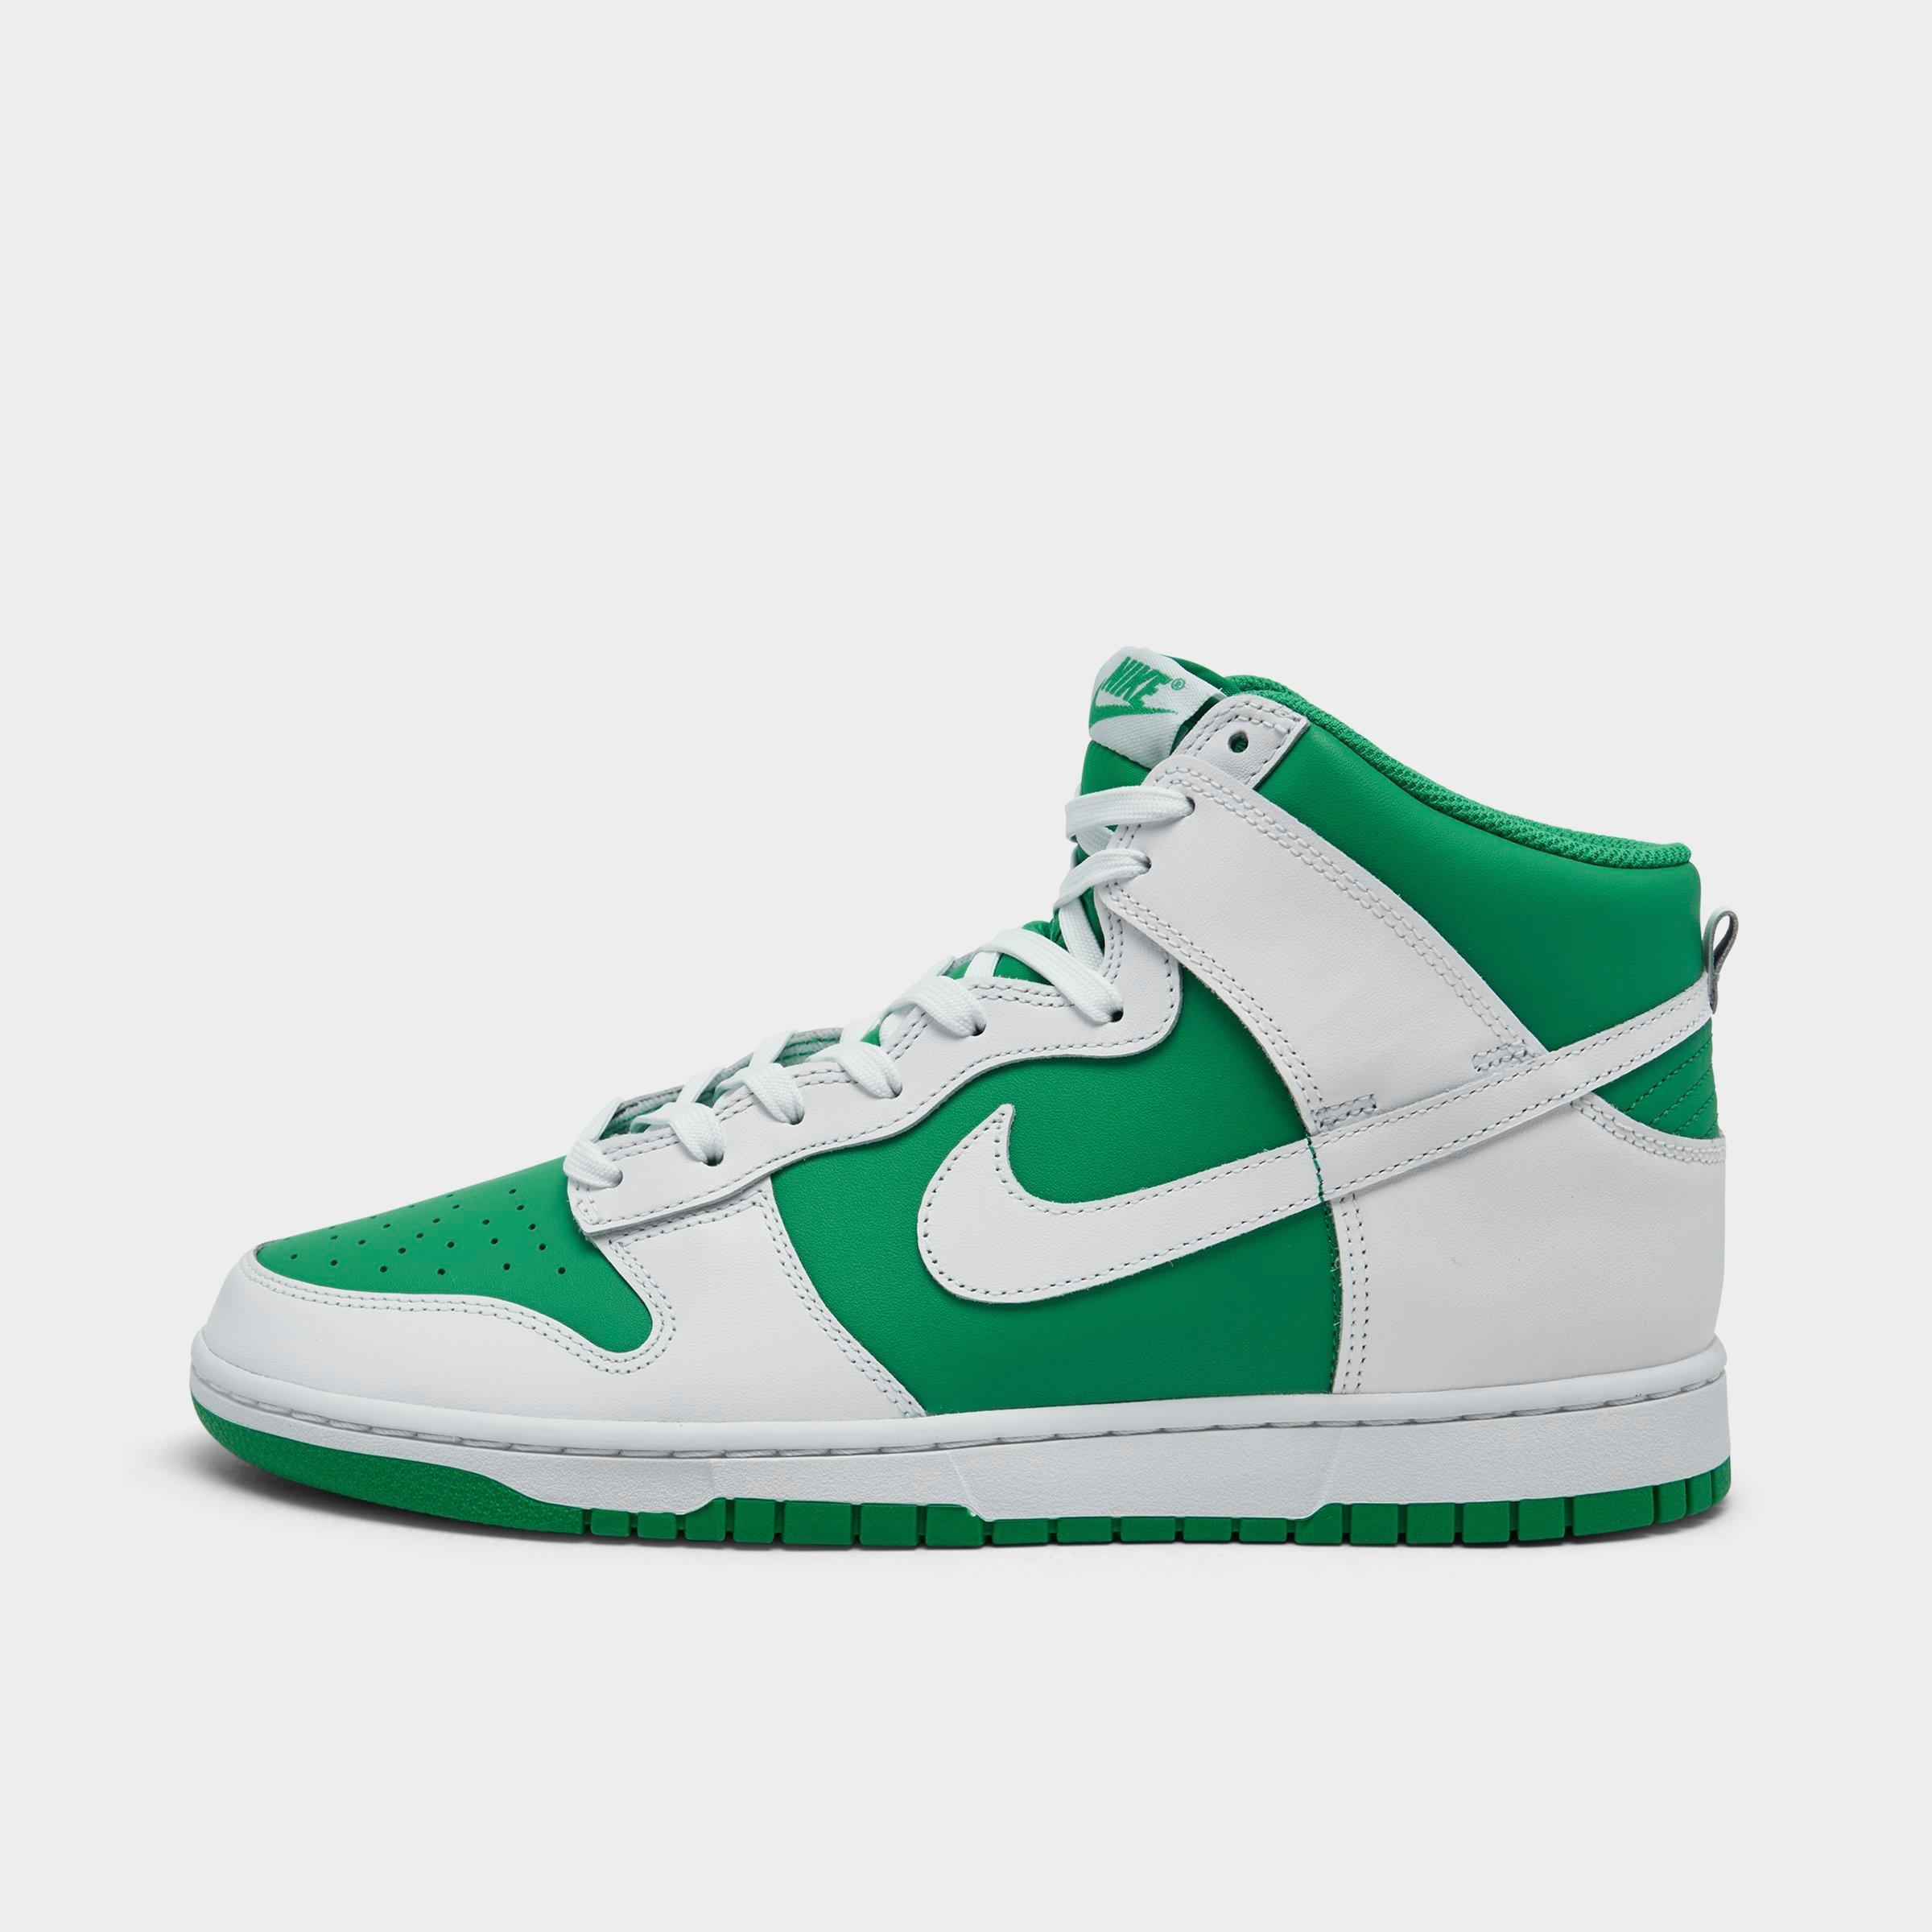 Nike Dunk High Retro BTTYS Casual Shoes